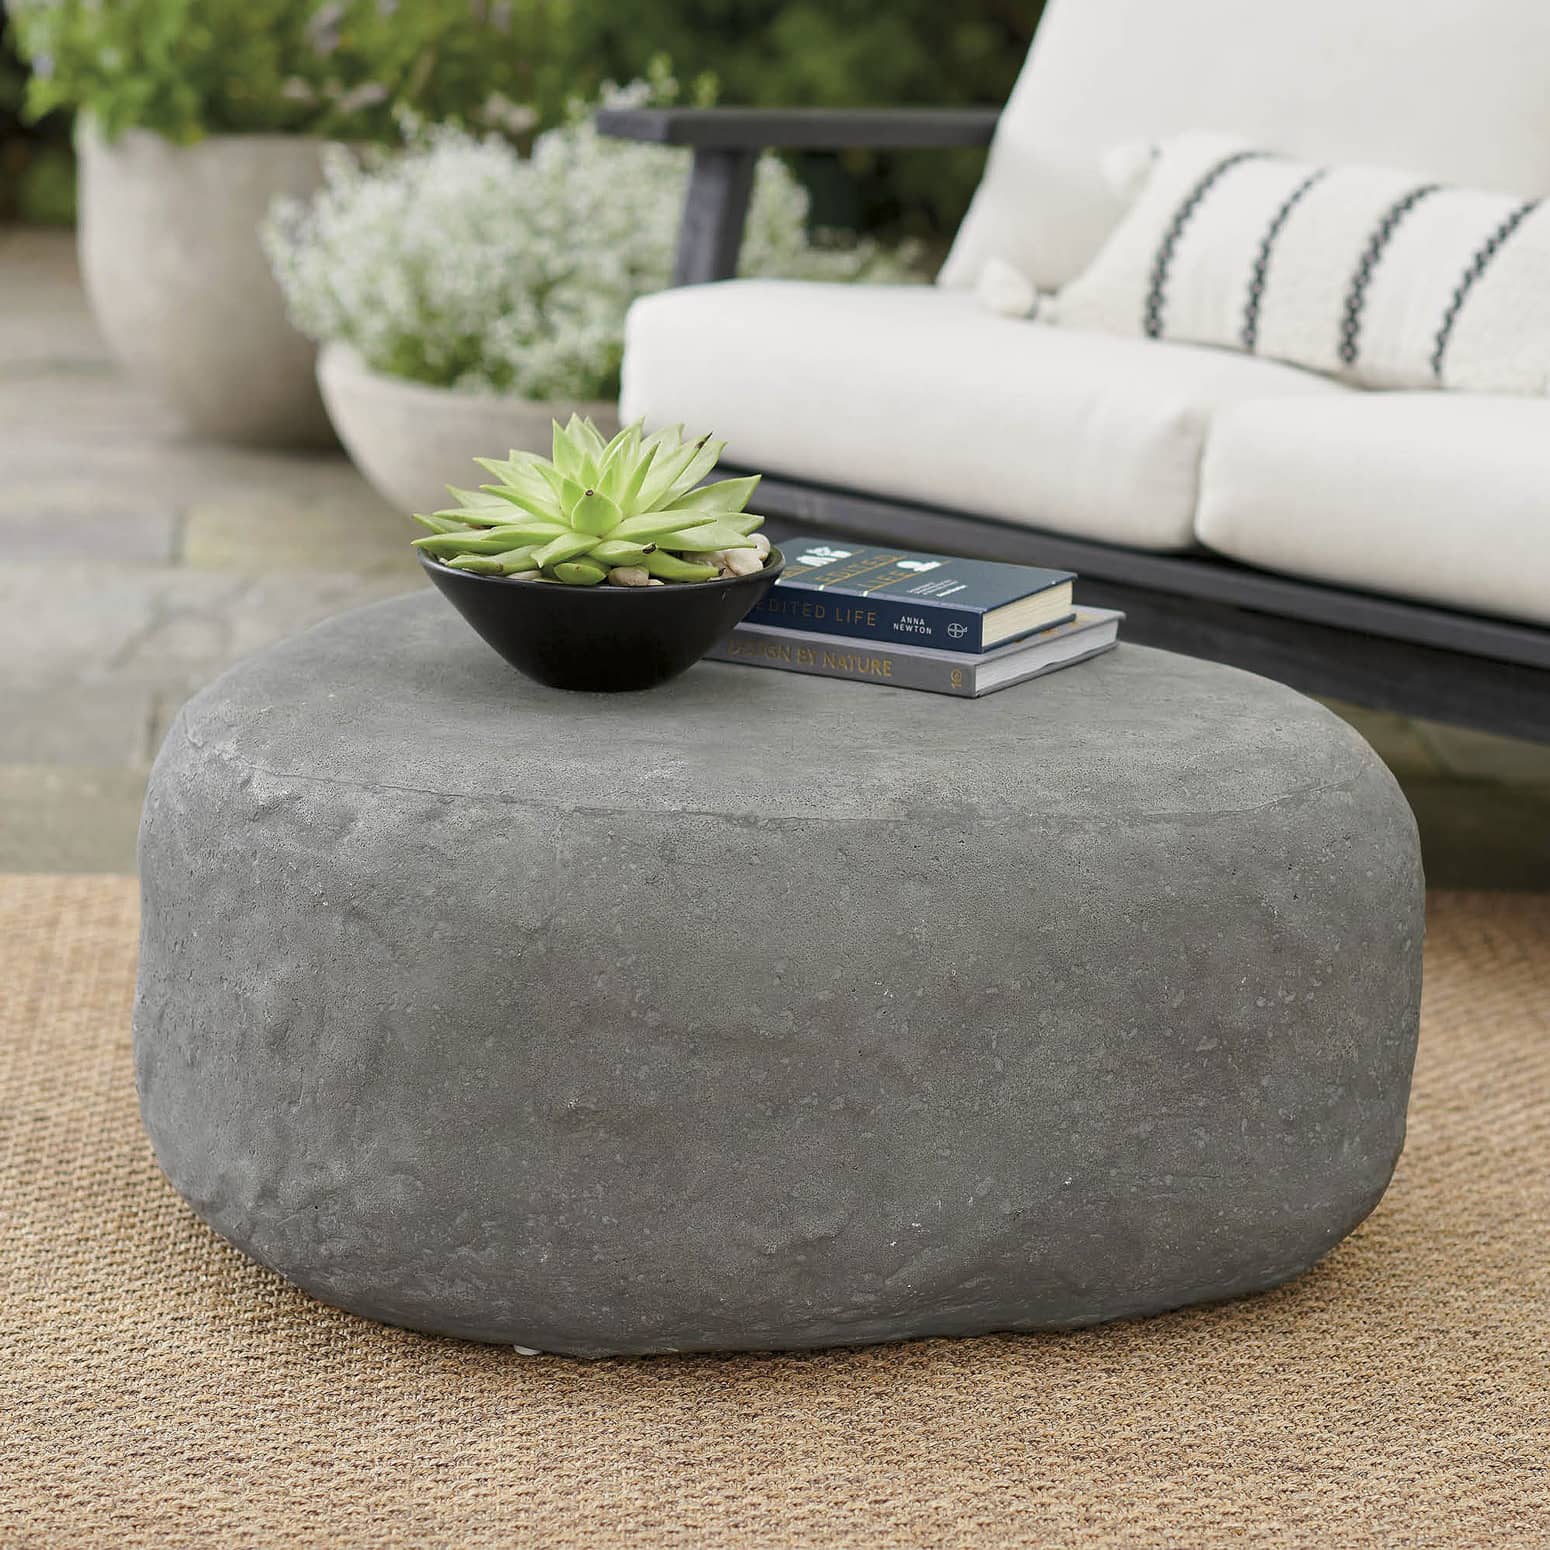 Giant River Stone Outdoor Coffee Table